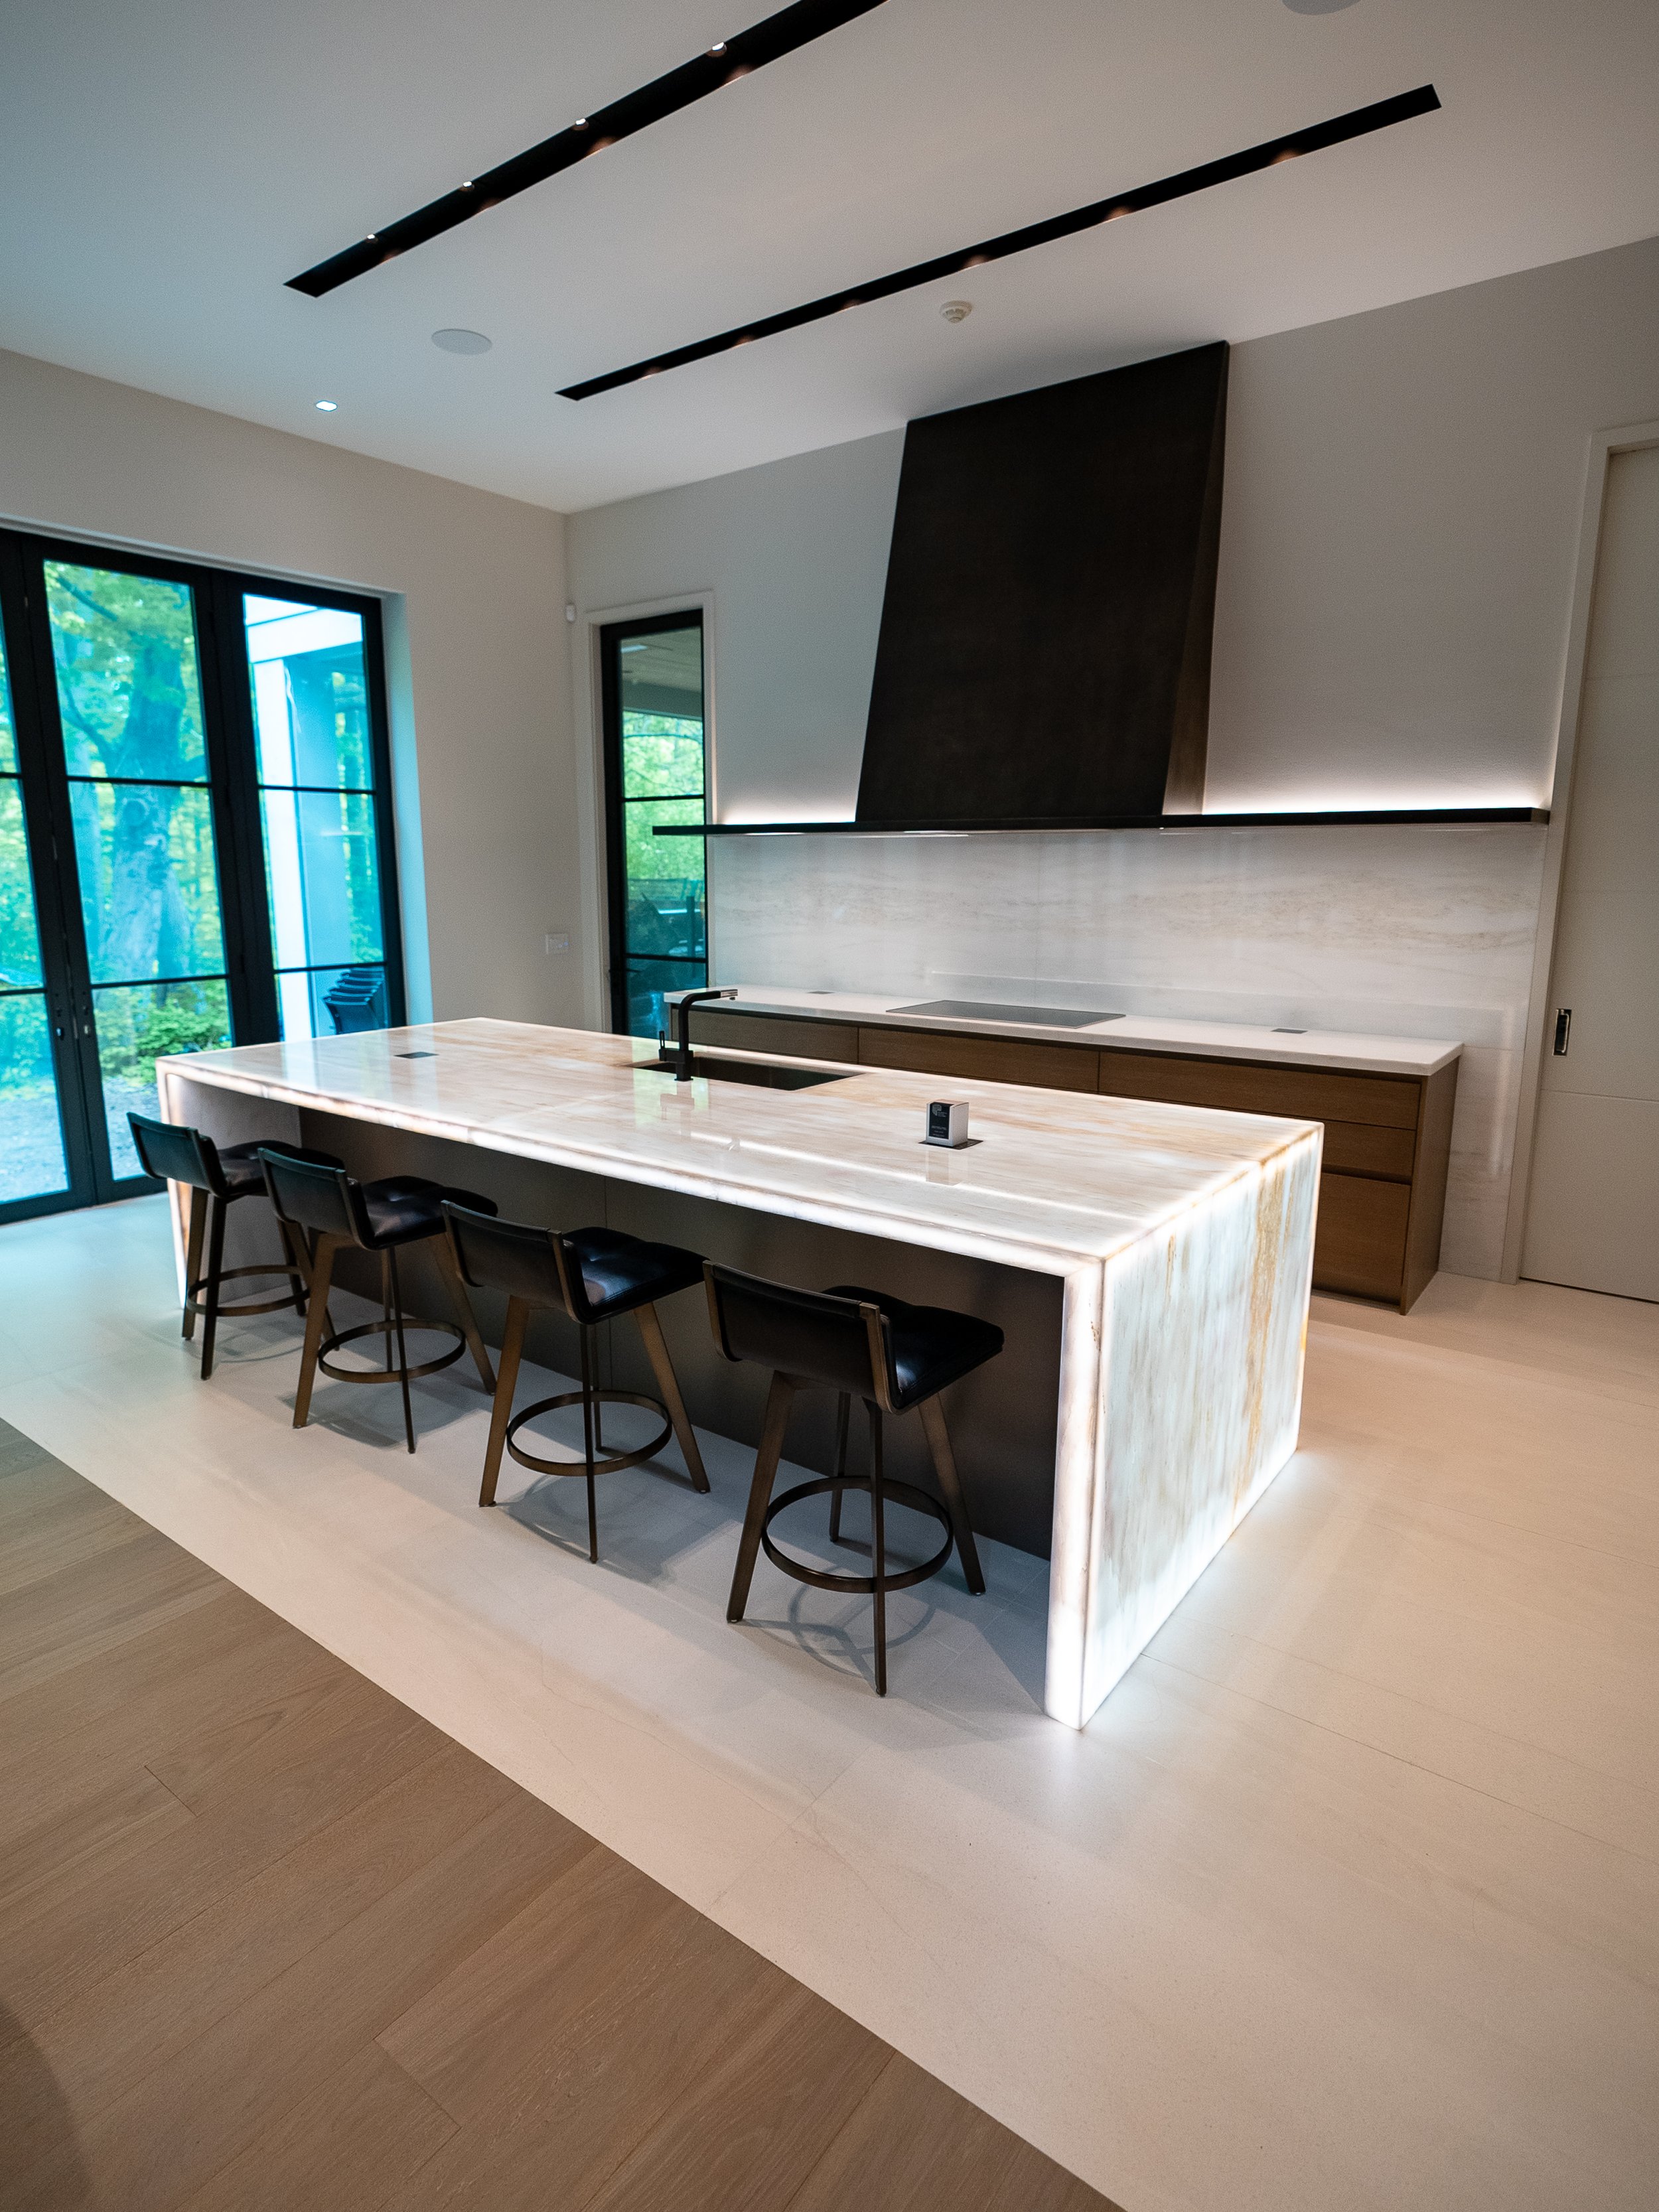  Several natural stone surfaces preserved with both polished &amp; honed PROSHIELD in this Bridle Path, Toronto home. Backlit Cristallo Quartzite kitchen island, range &amp; countertops, basement bar island, countertops as well as wine bar. Polished 